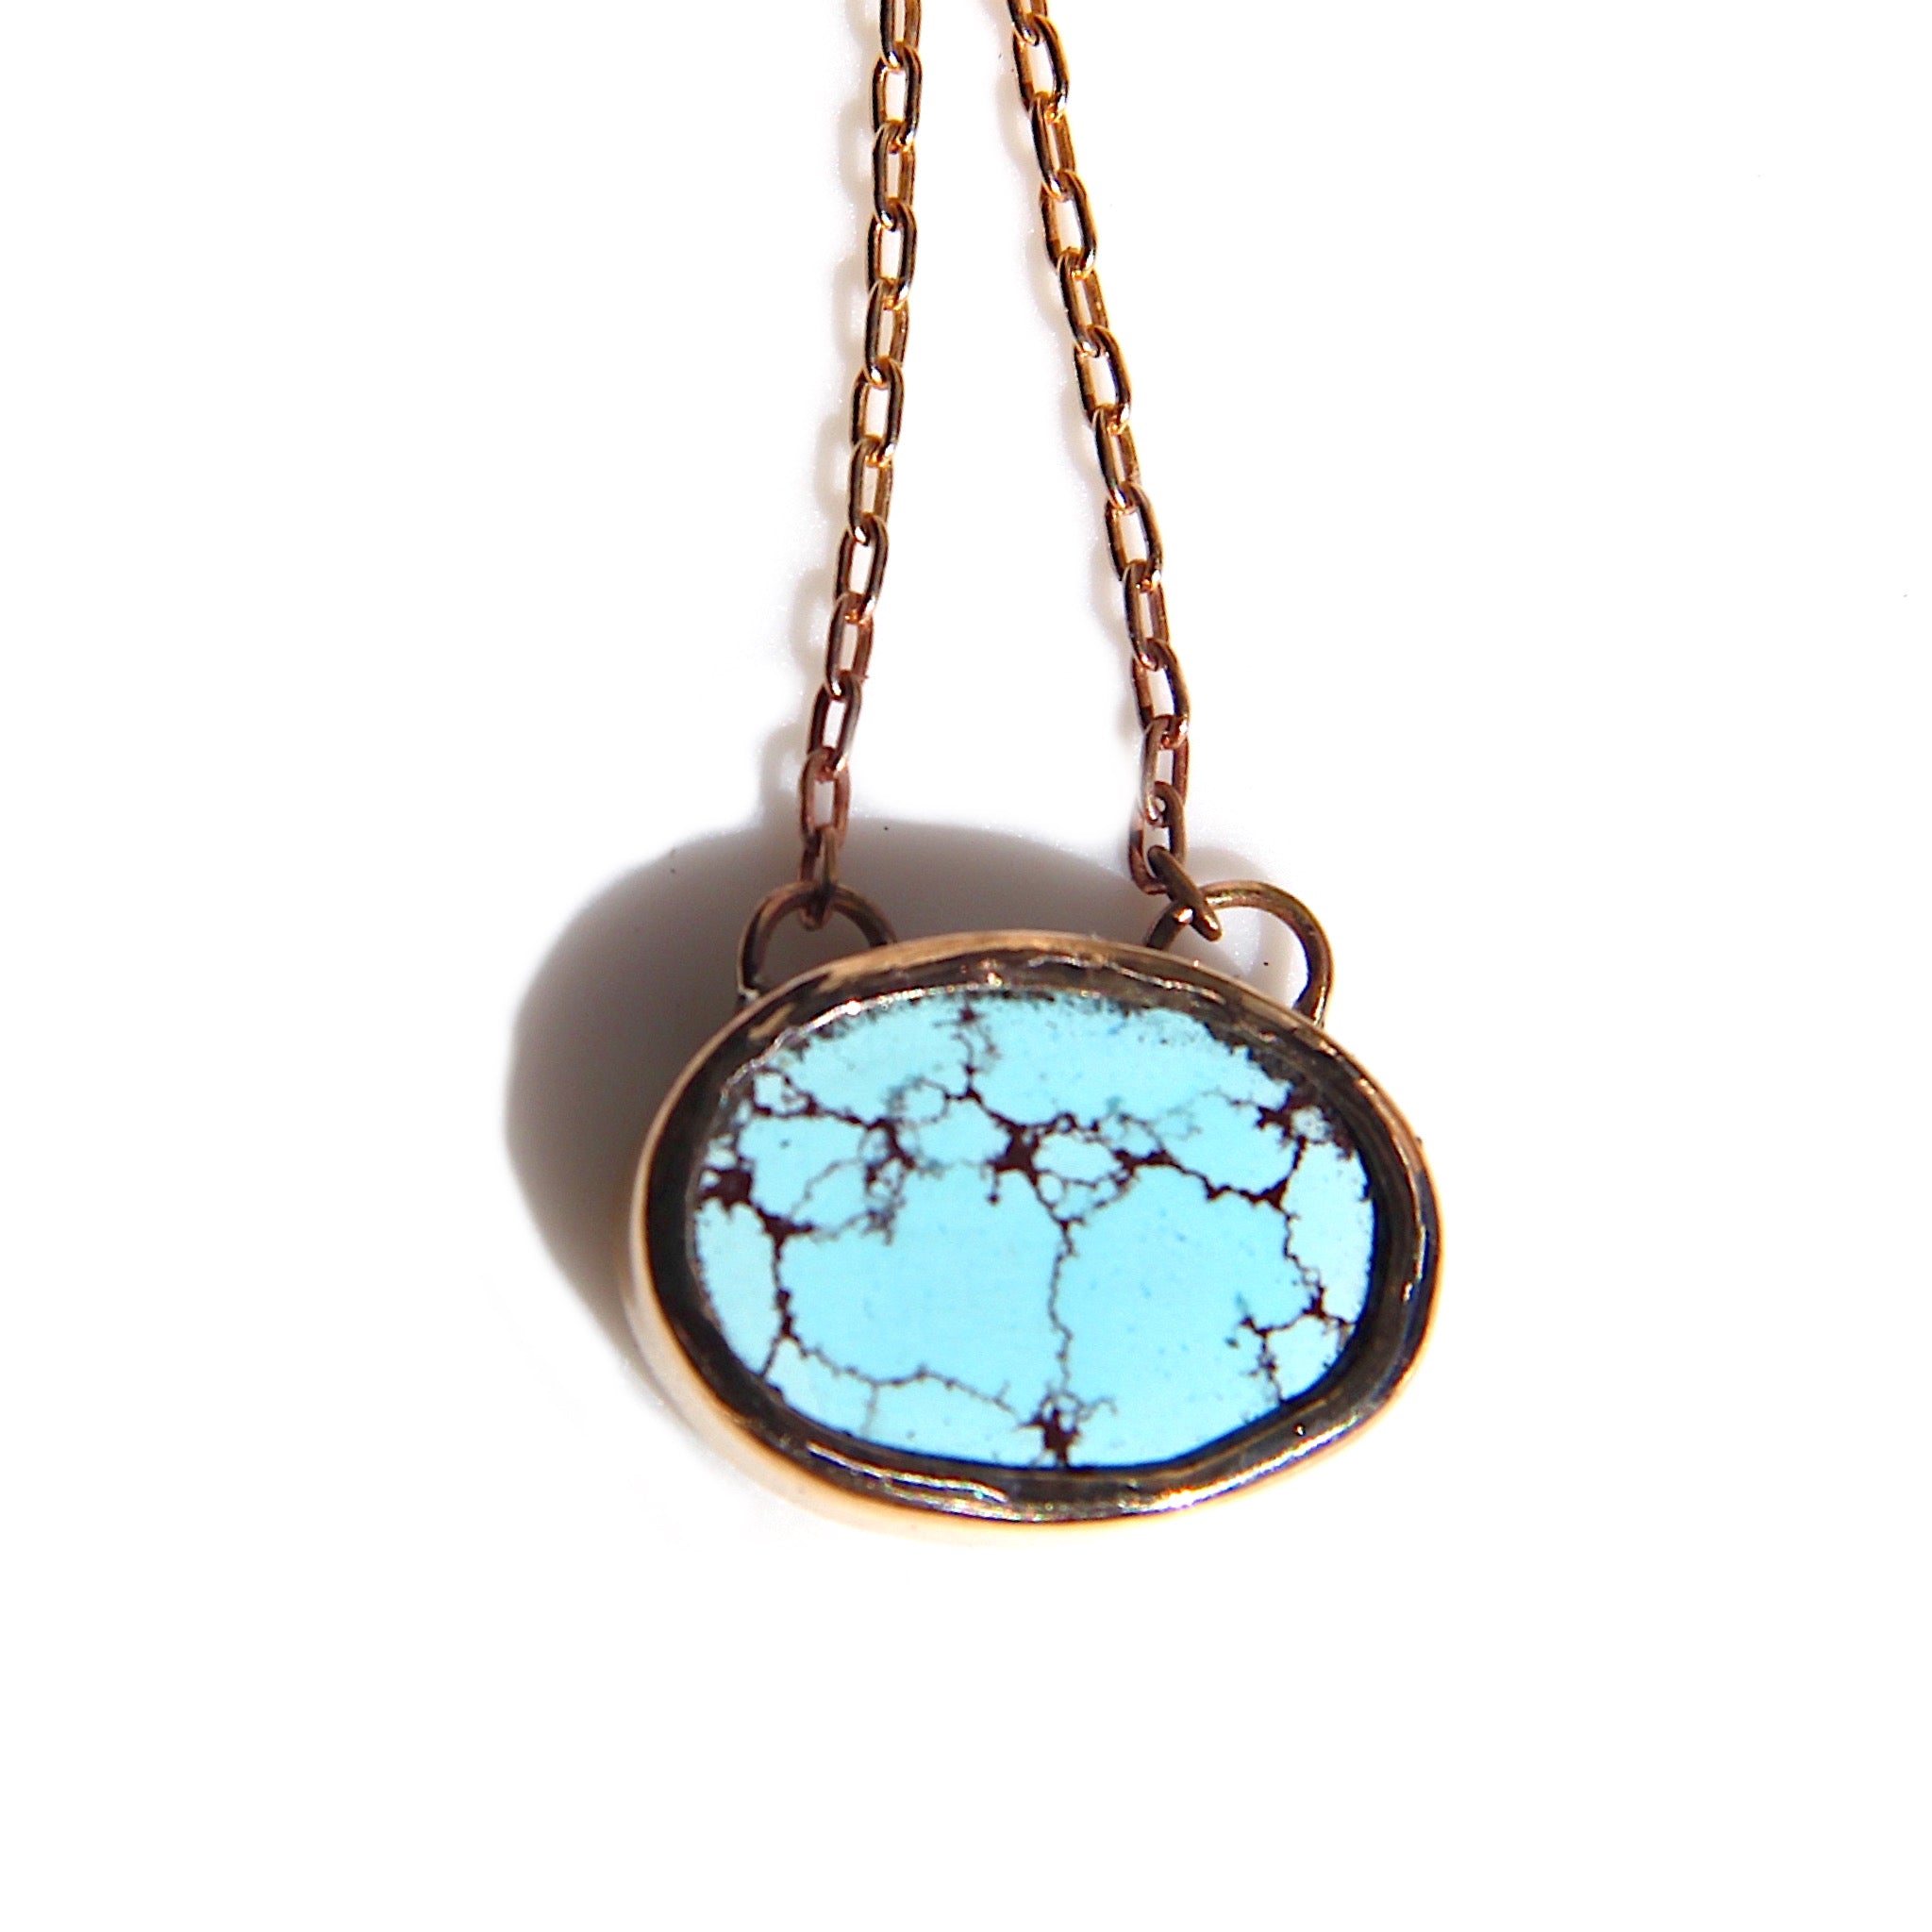 Lavender Turquoise necklace